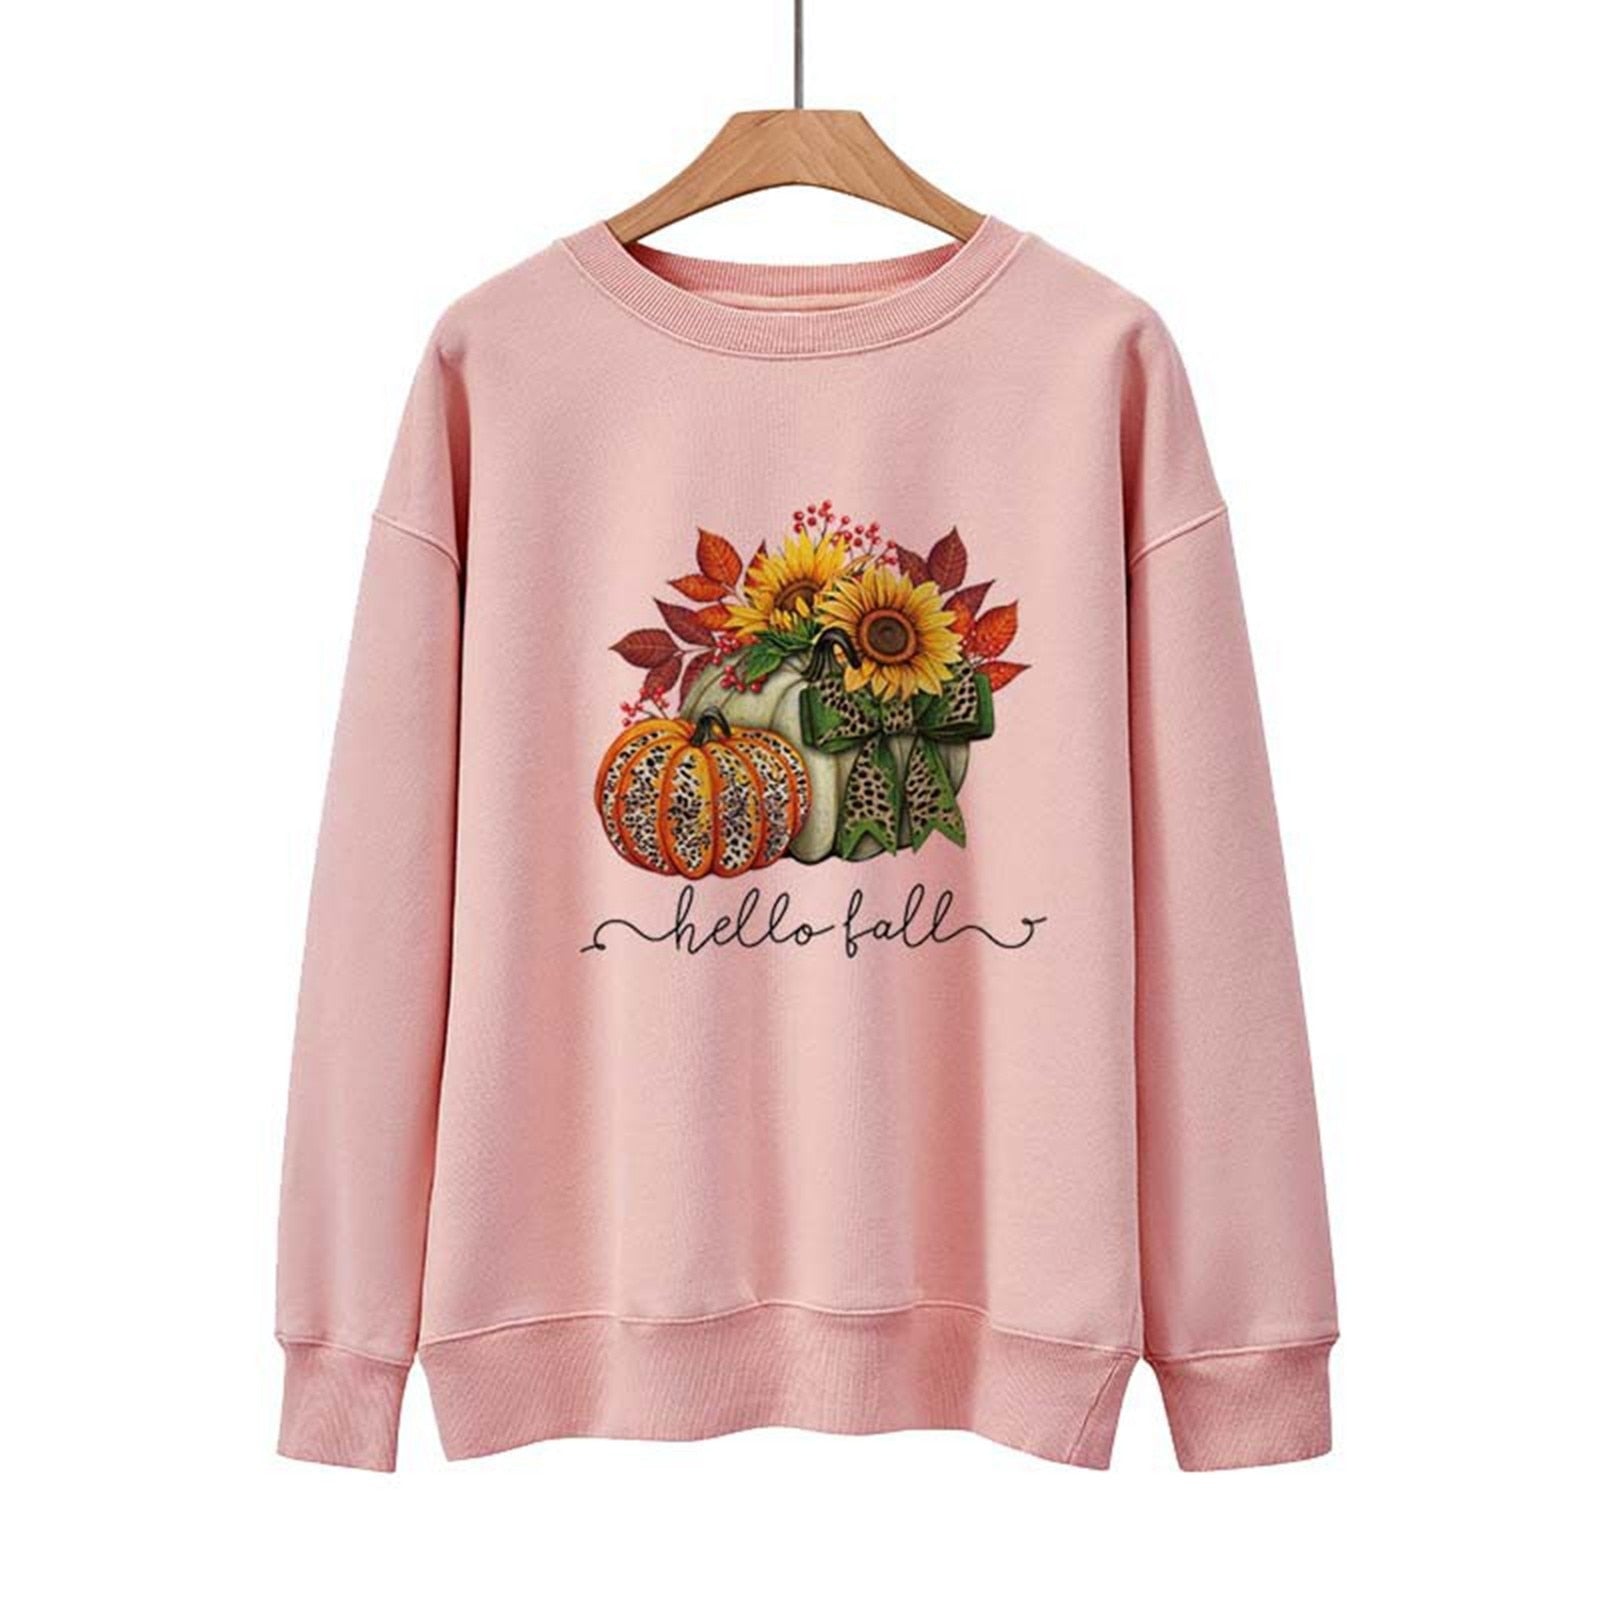 Hello Fall Women's Halloween Sweater Loose Fit Casual Pullover Top Sweater with Front Zipper AMAIO